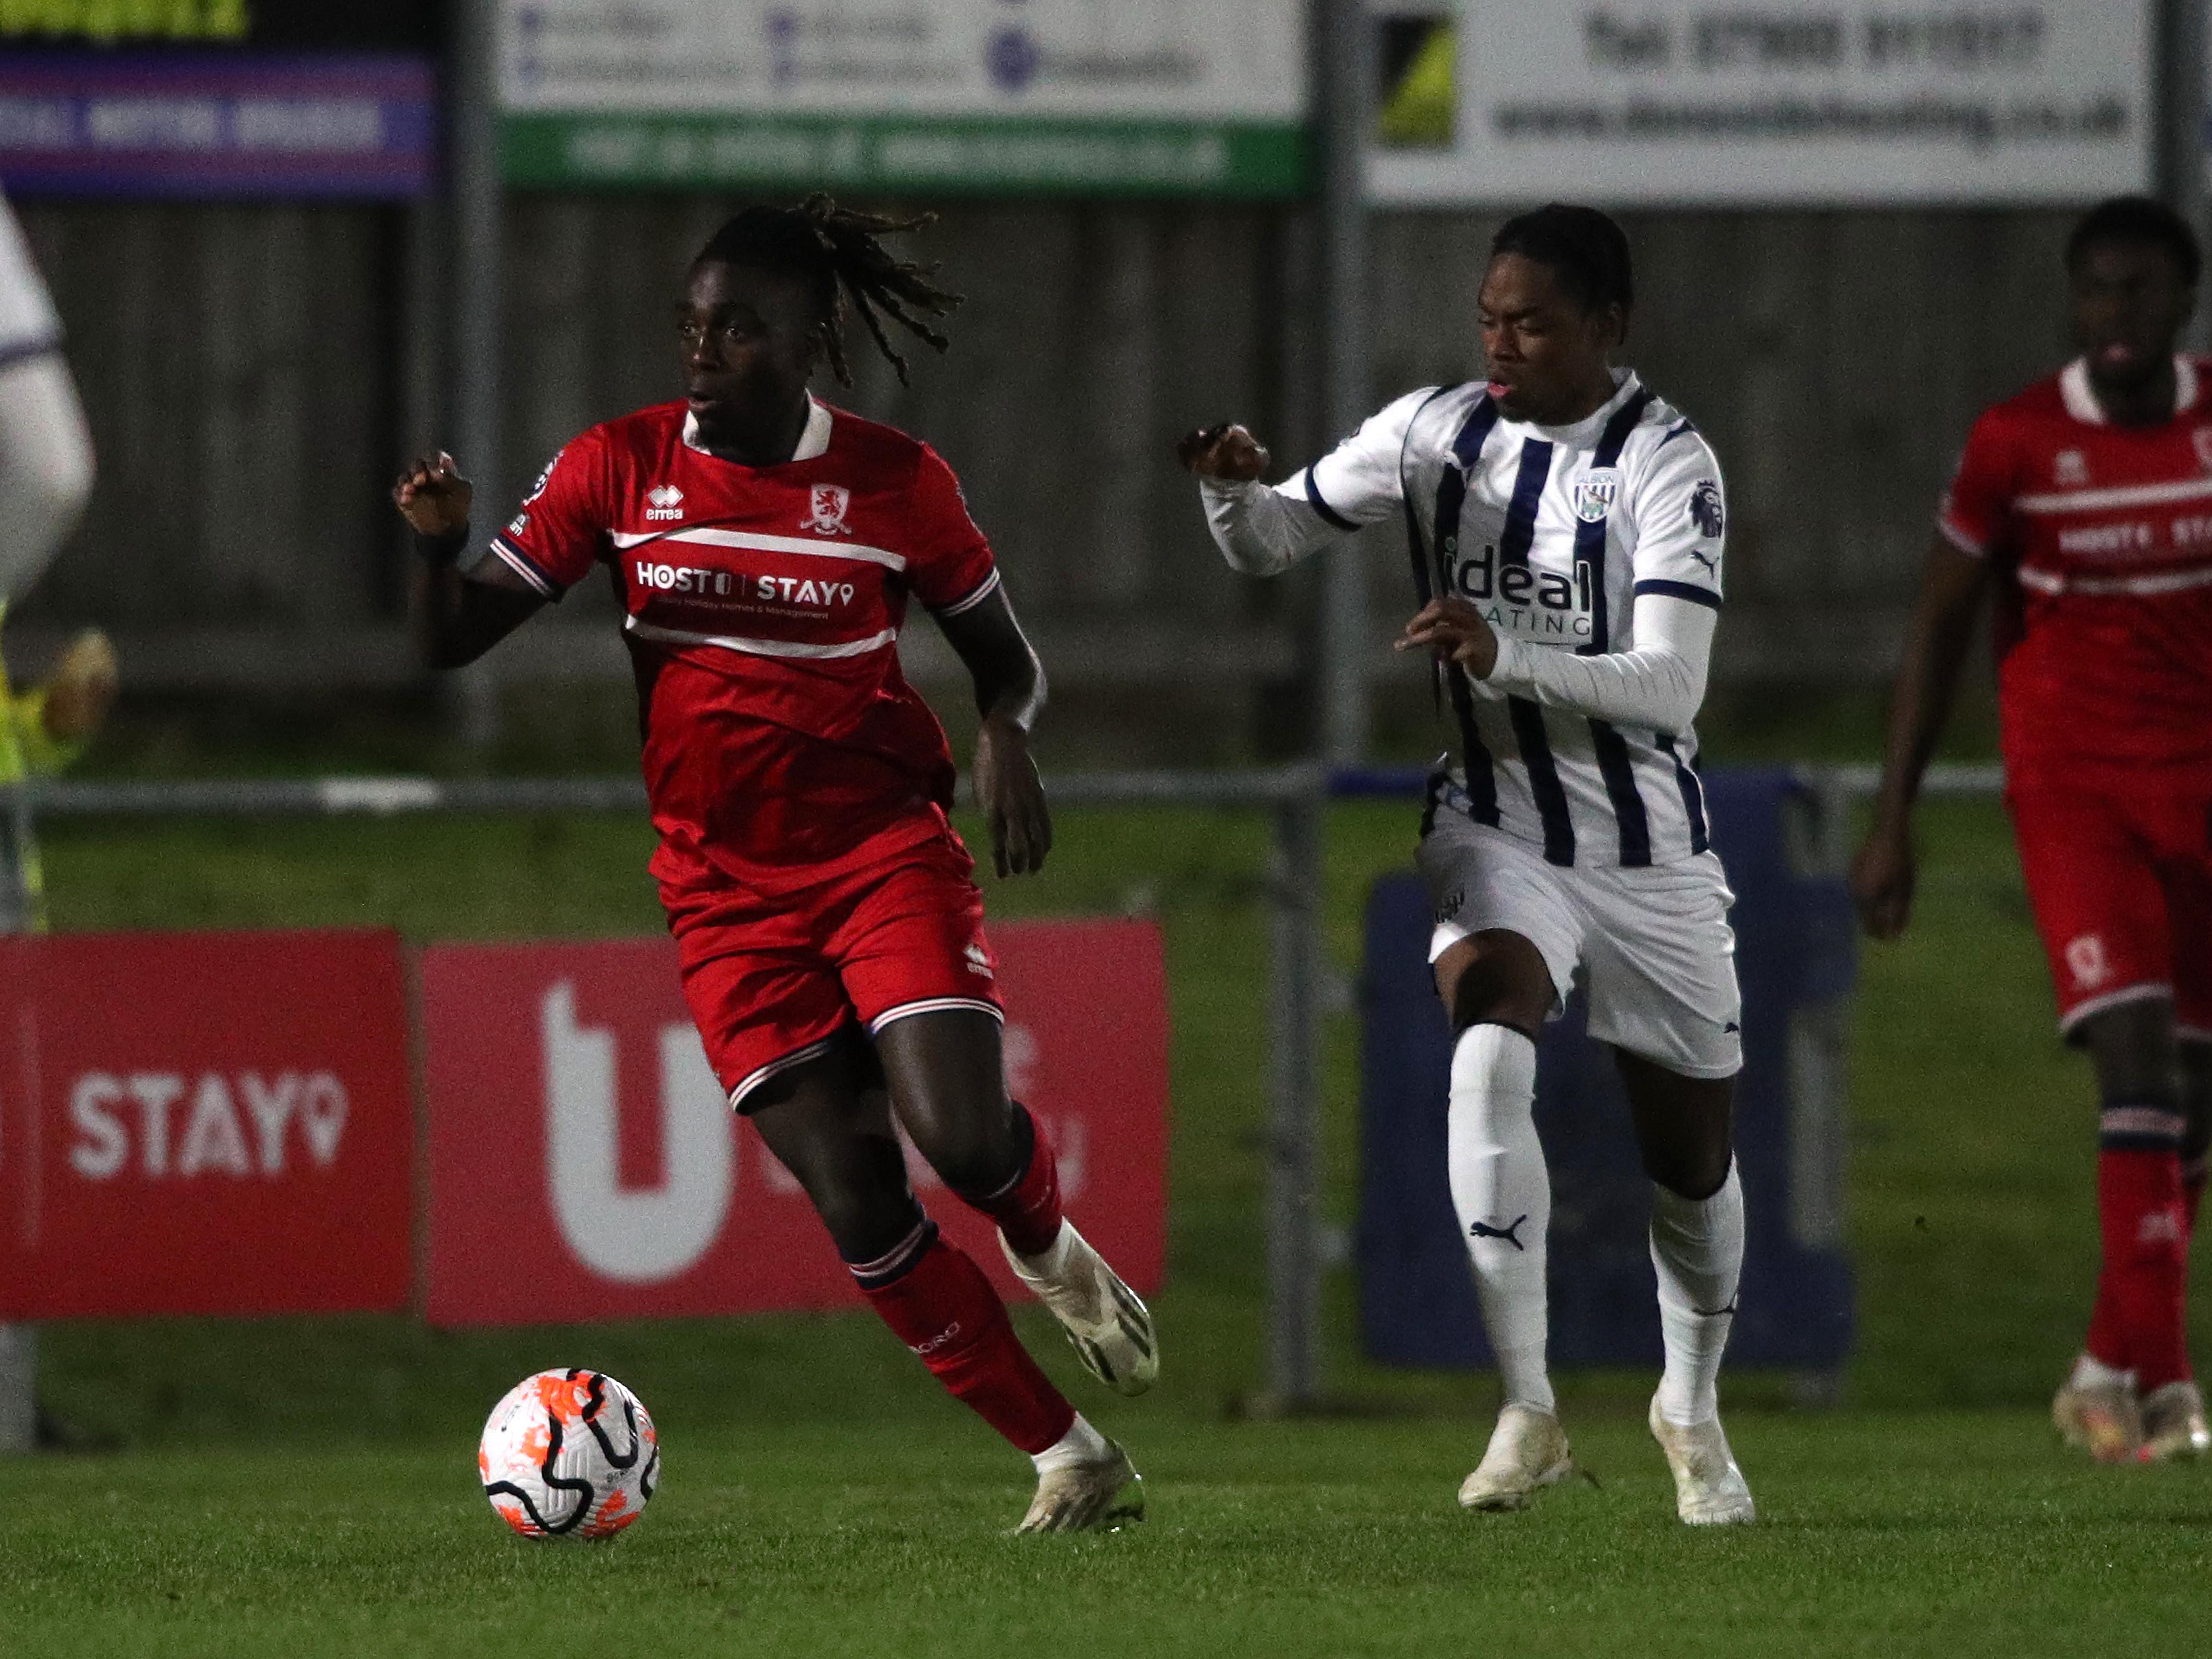 A photo of Akeel Higgins in action for the Pl2 team against Middlesbrough 